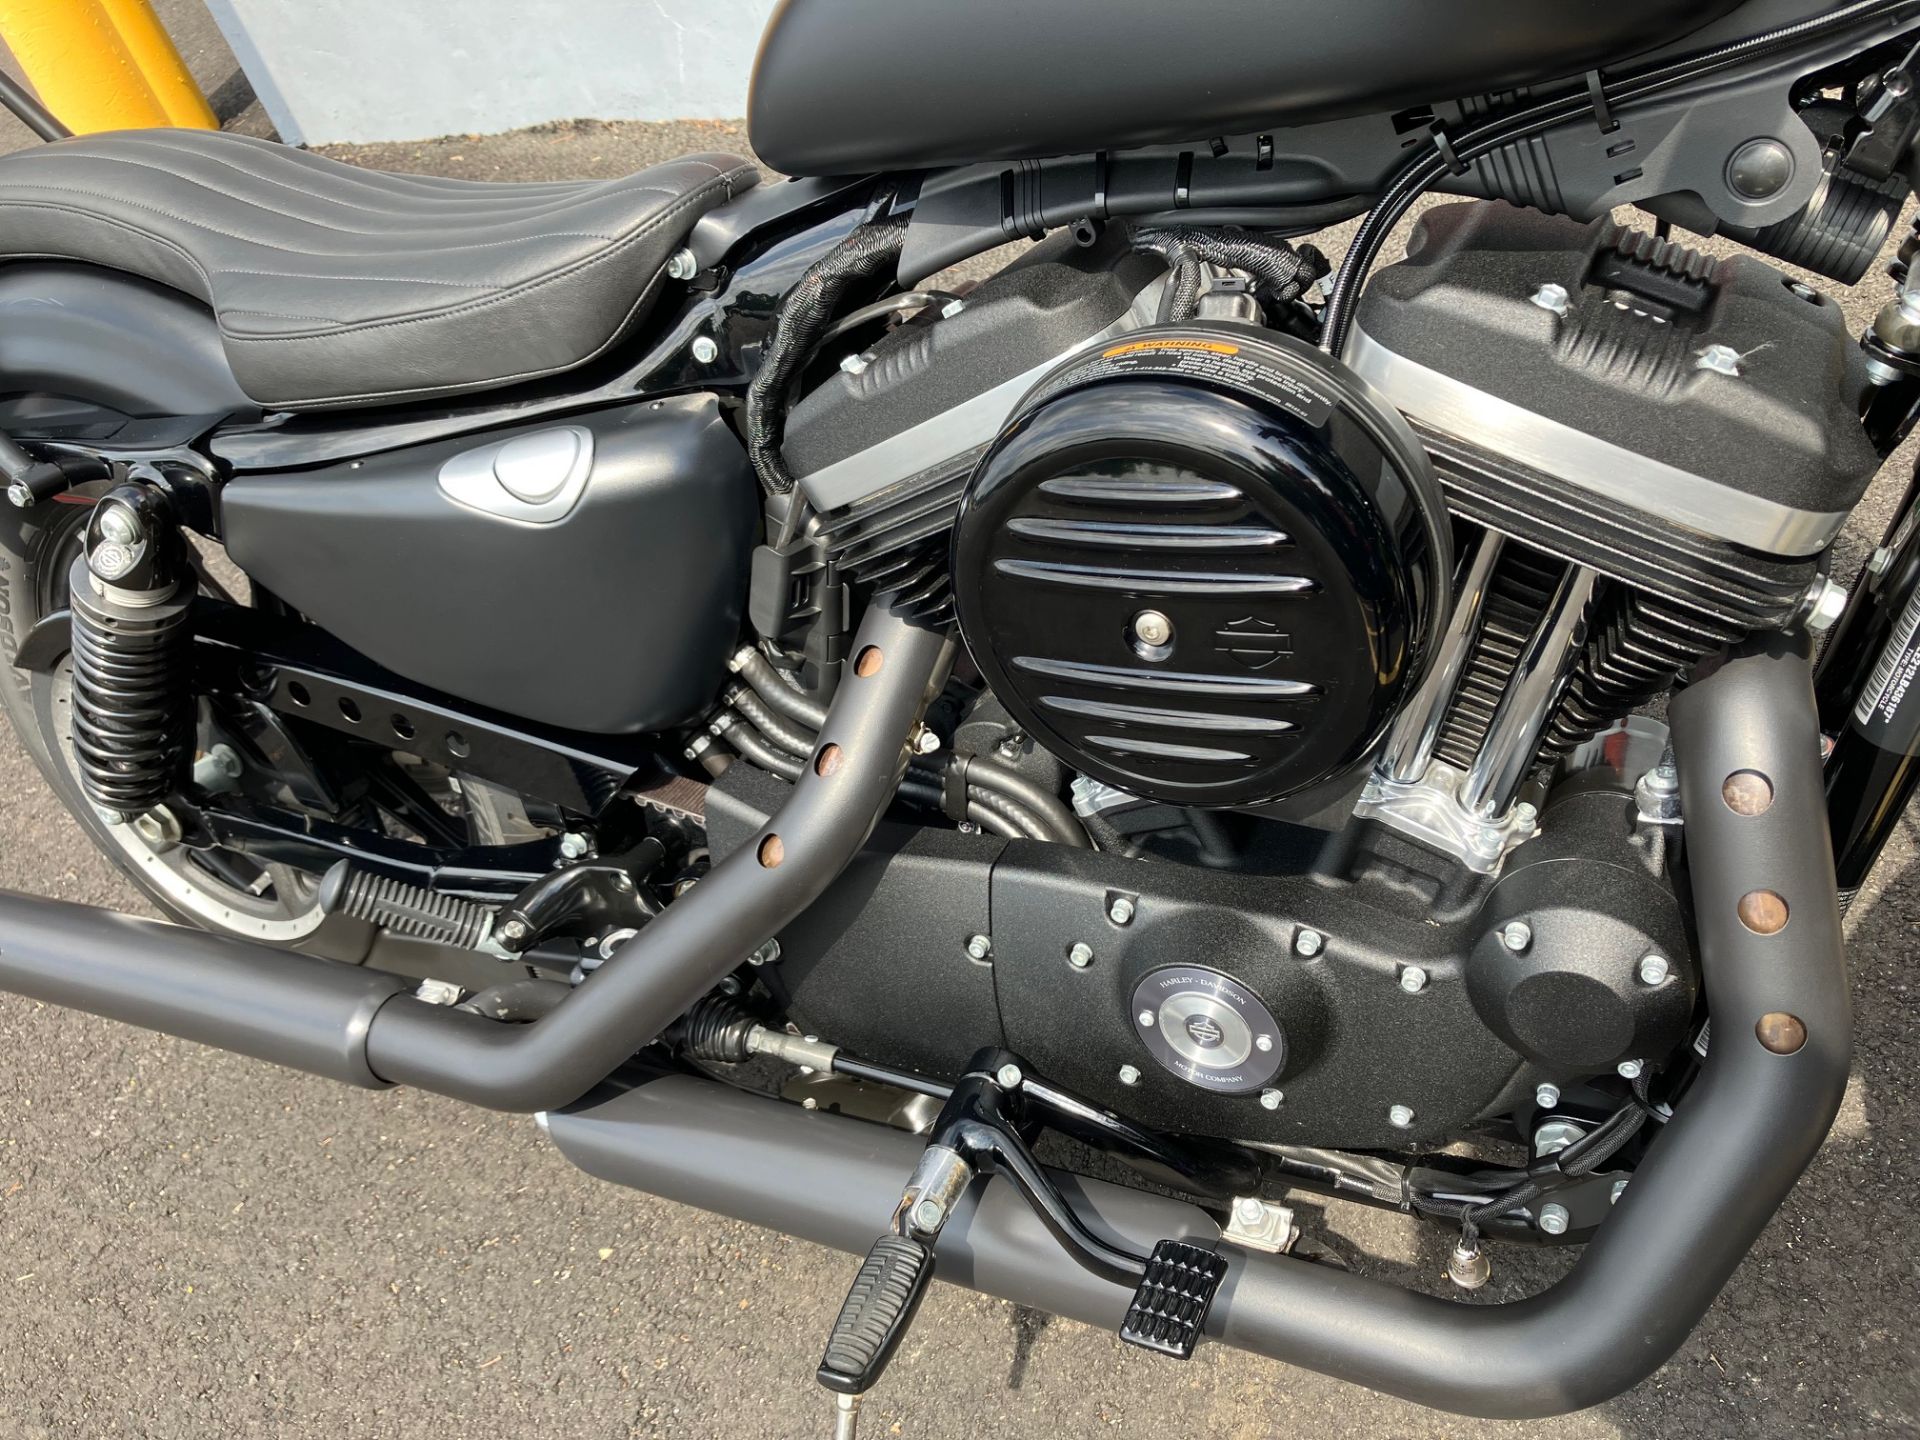 2020 Harley-Davidson IRON 883 in West Long Branch, New Jersey - Photo 8